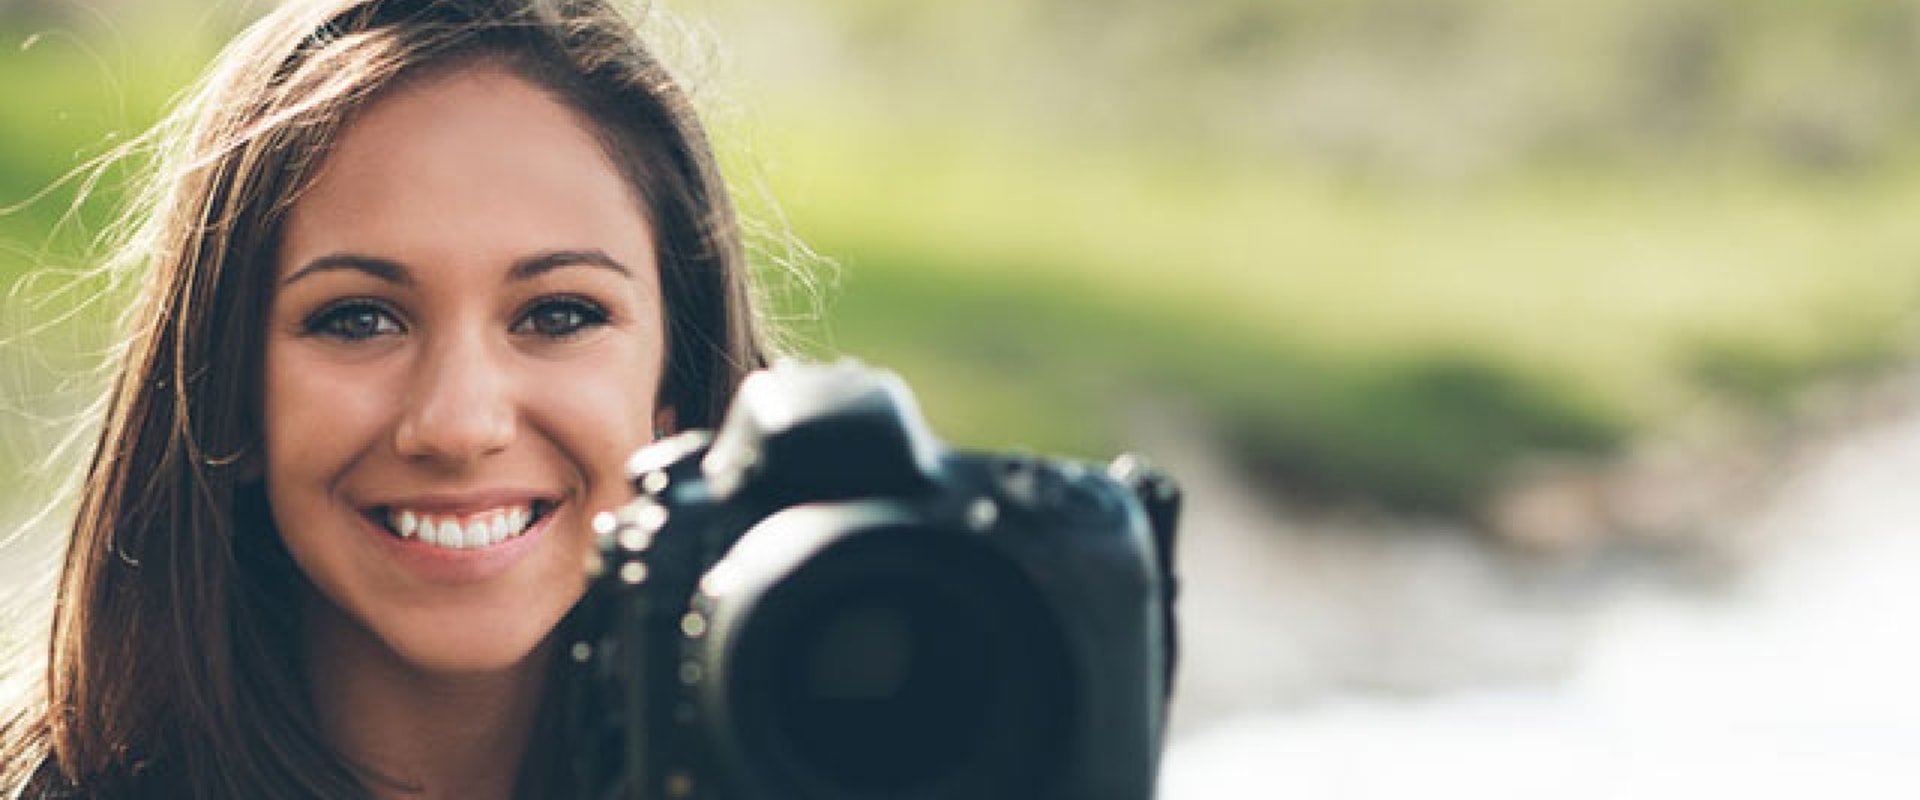 5 Essential Skills for Photographers to Master